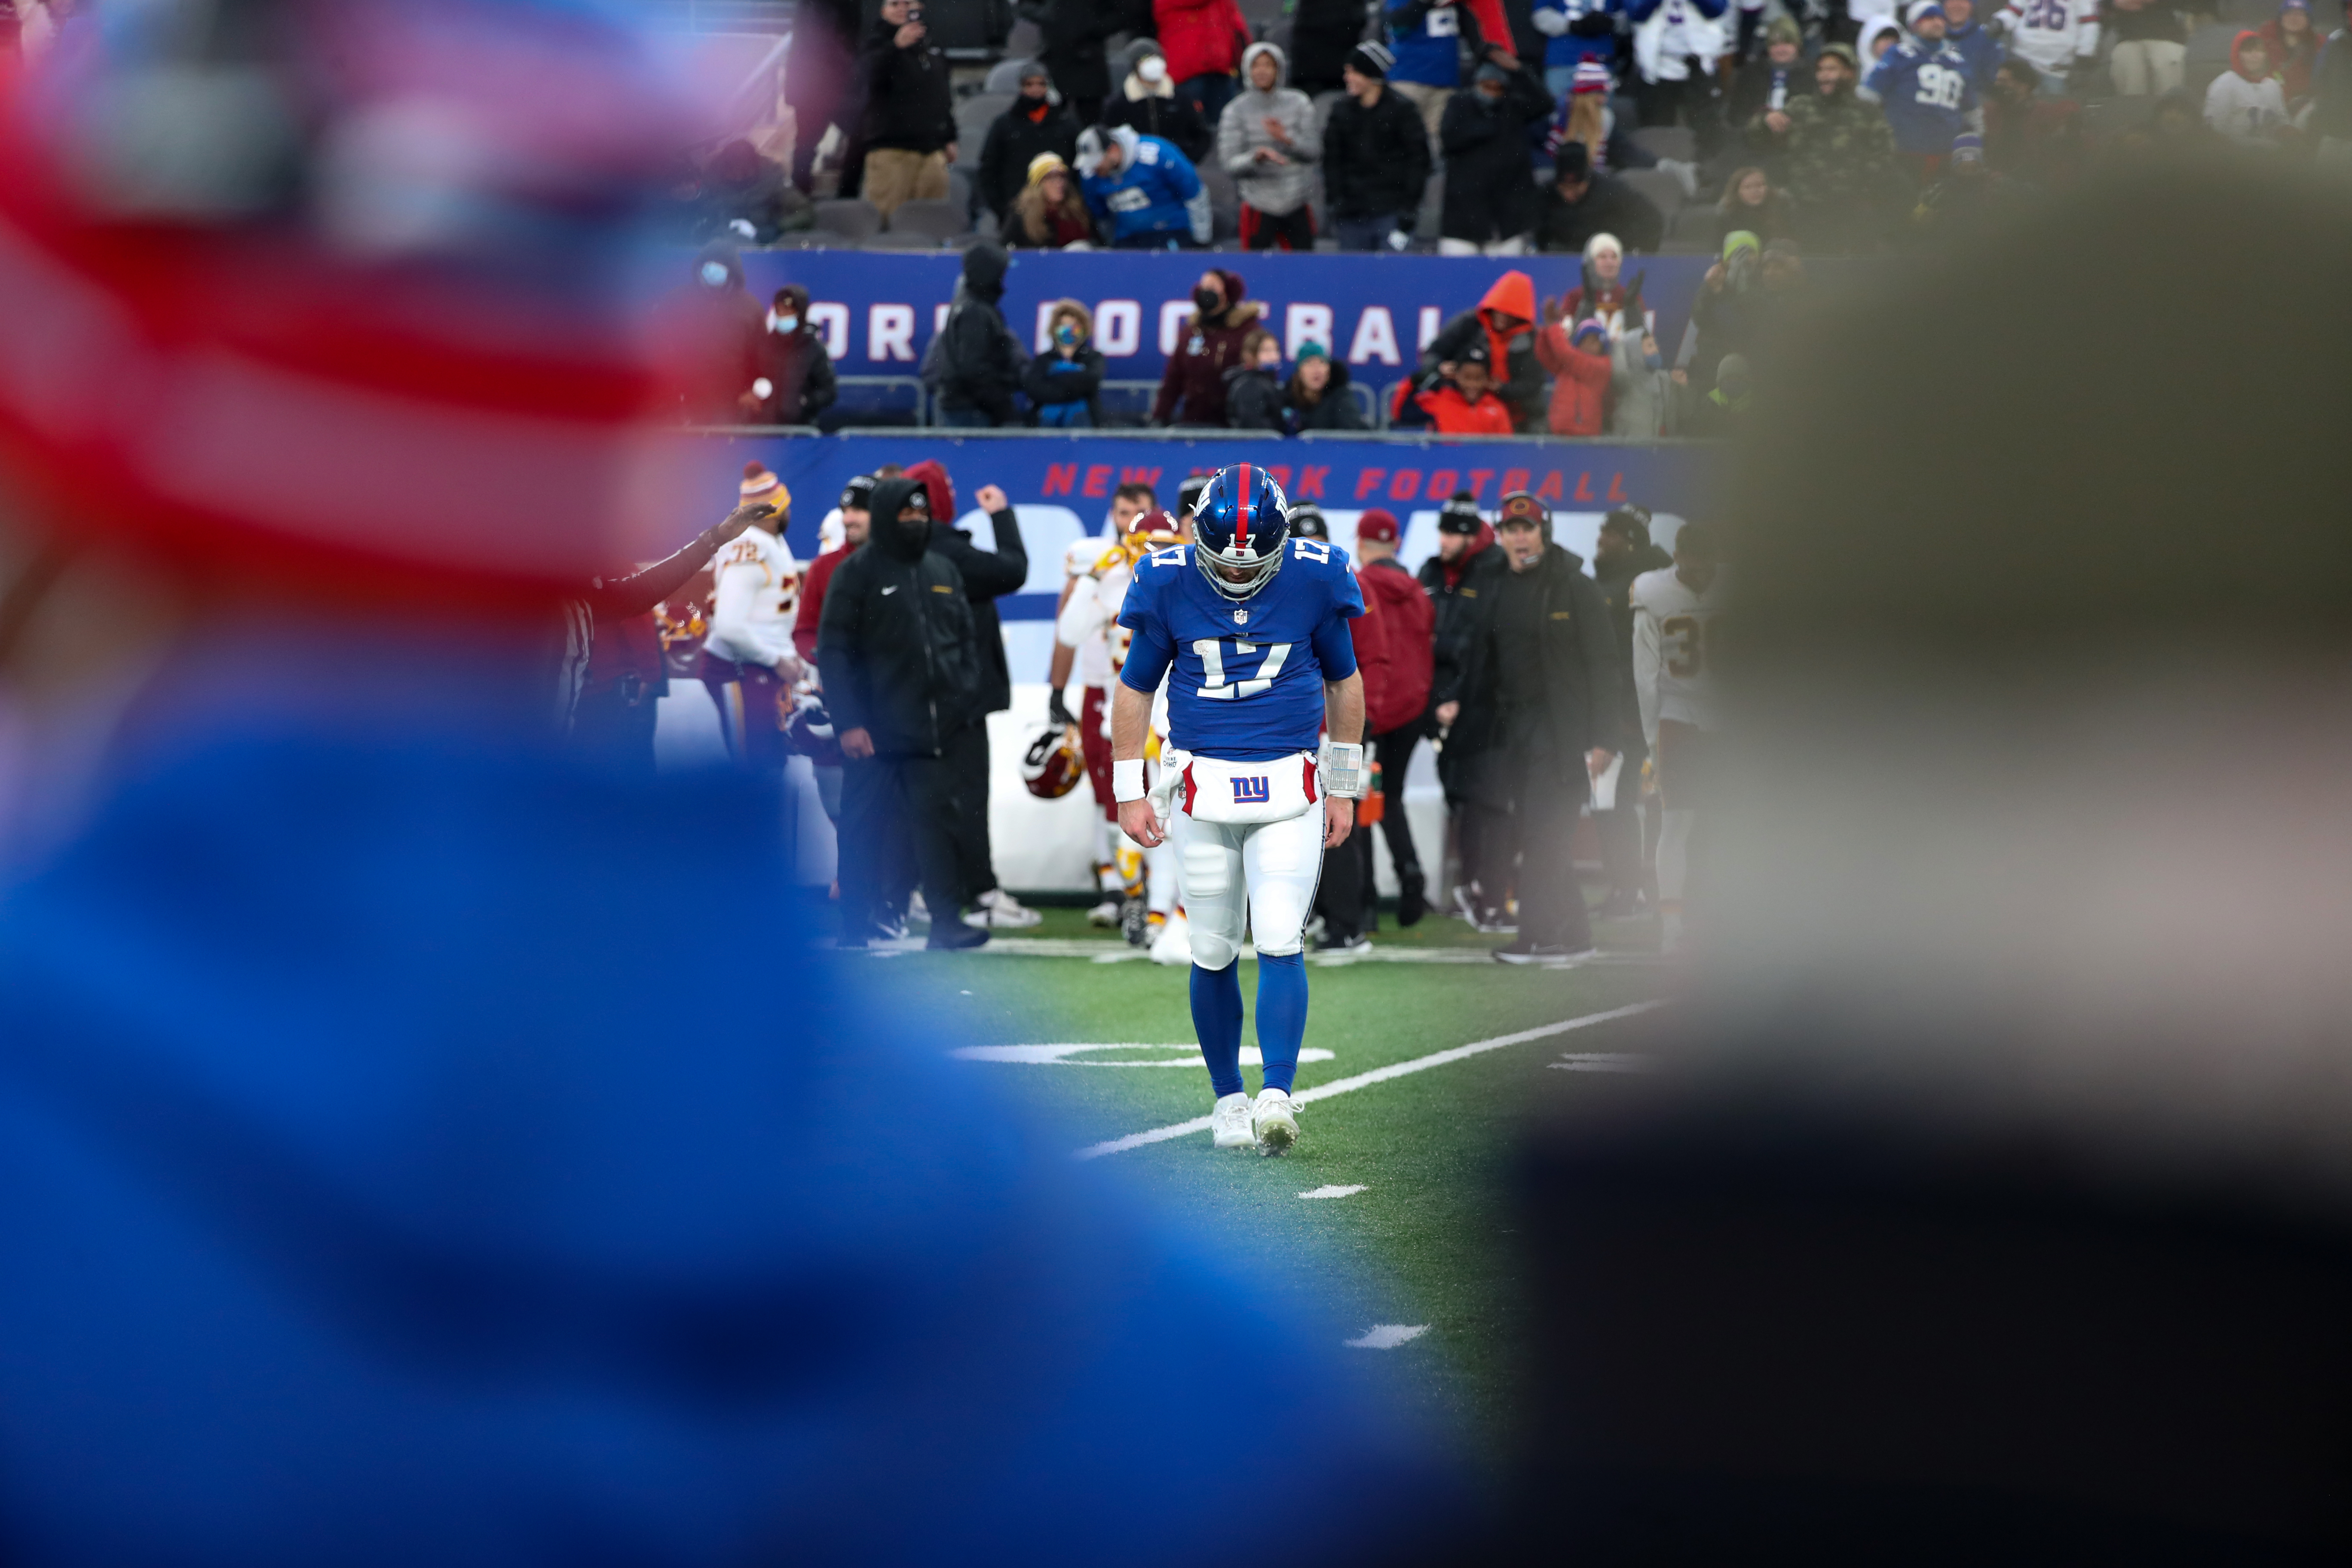 New York Giants quarterback Jake Fromm (17) reacts after he threw a game-ending interception during the fourth quarter against the Washington Football Team on Sunday, Jan. 9, 2022 in East Rutherford, N.J. Washington won, 22-7.